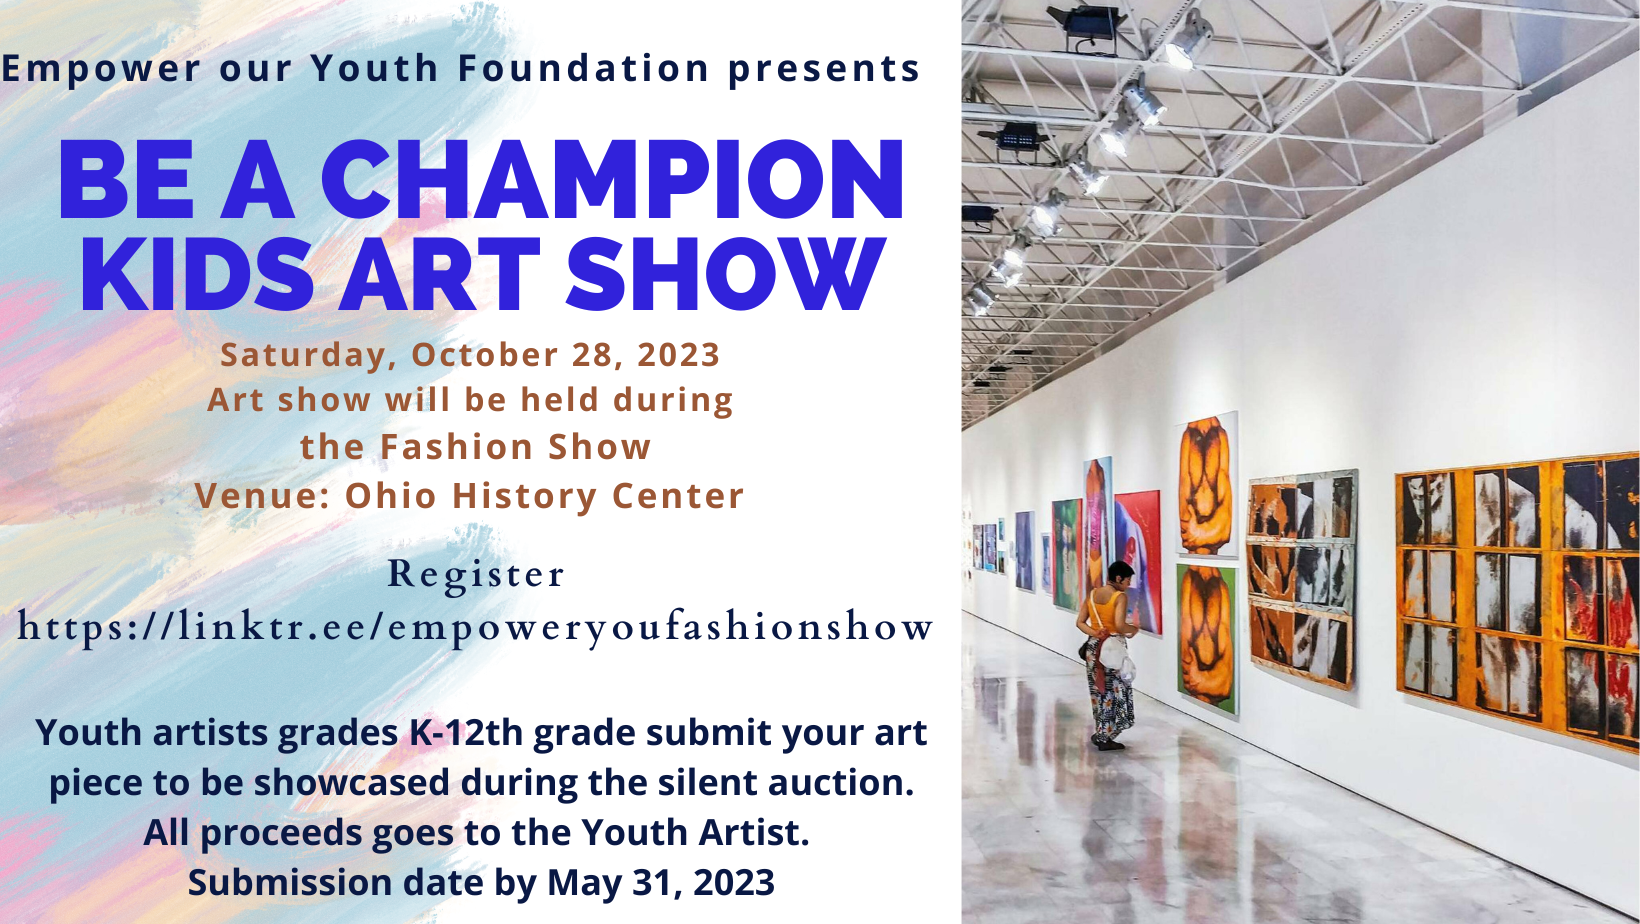 Register to be a Youth Artist